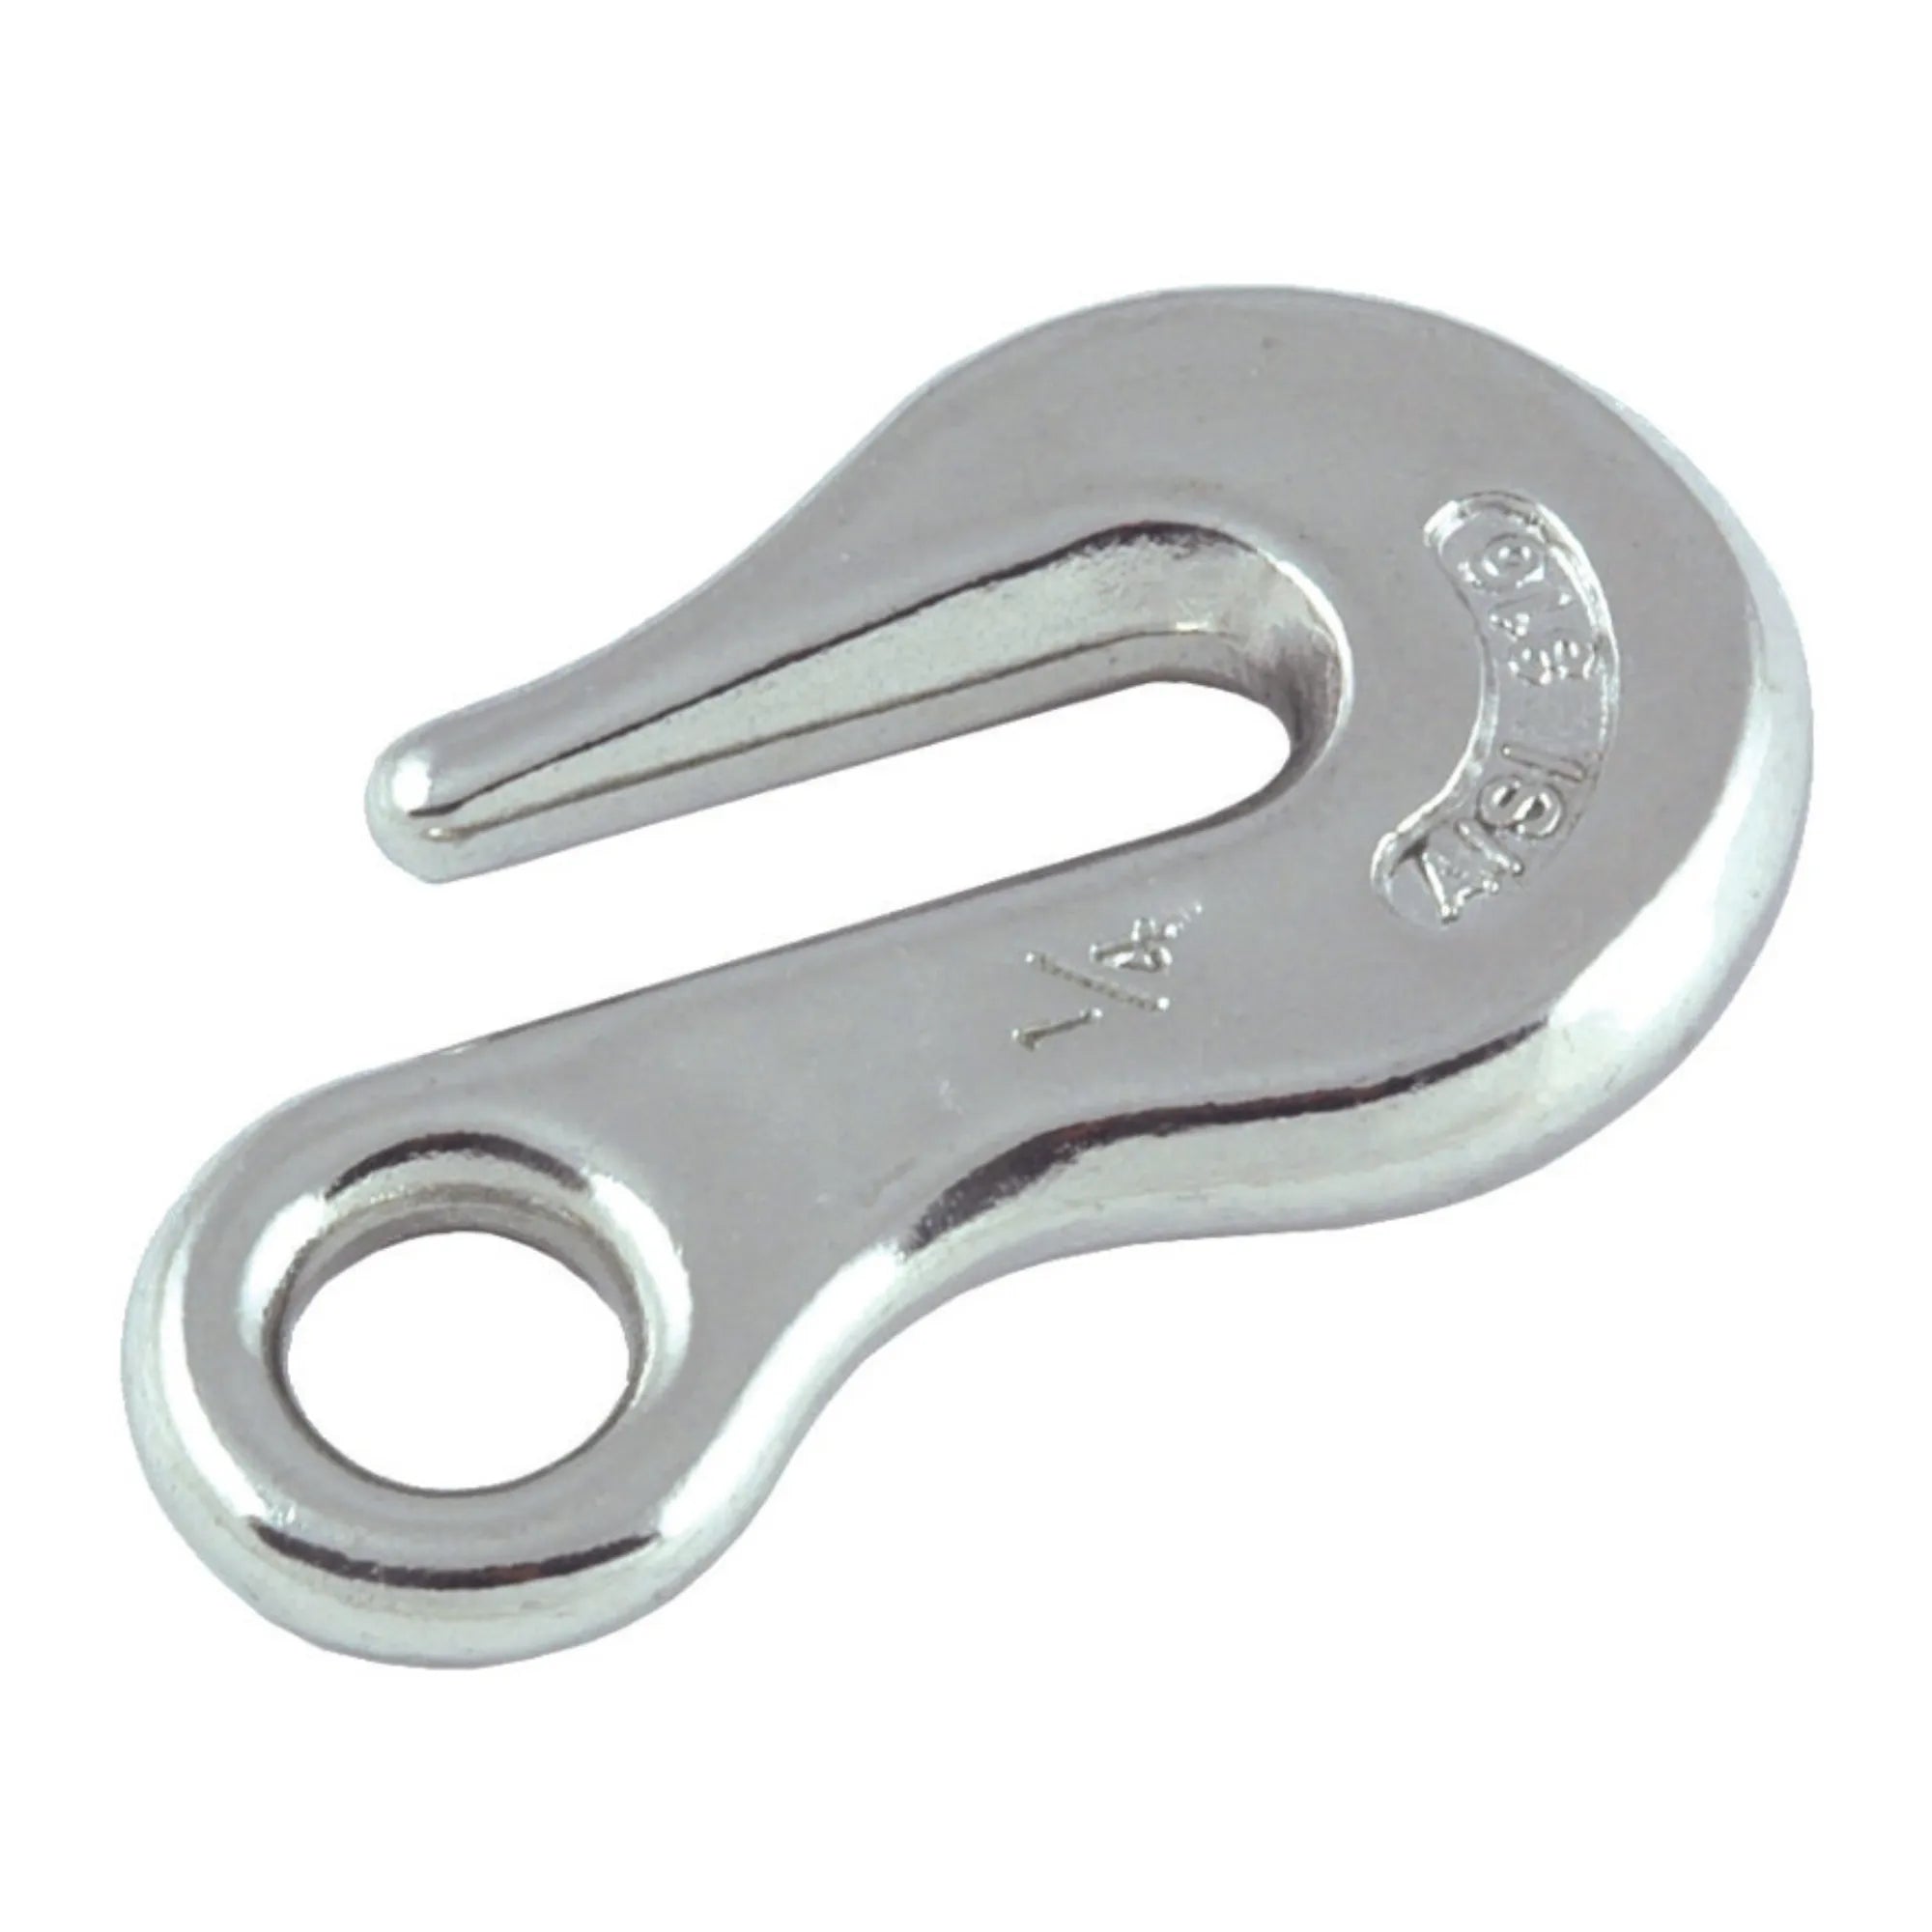 Stainless Steel Chain Grab Hook with Eye